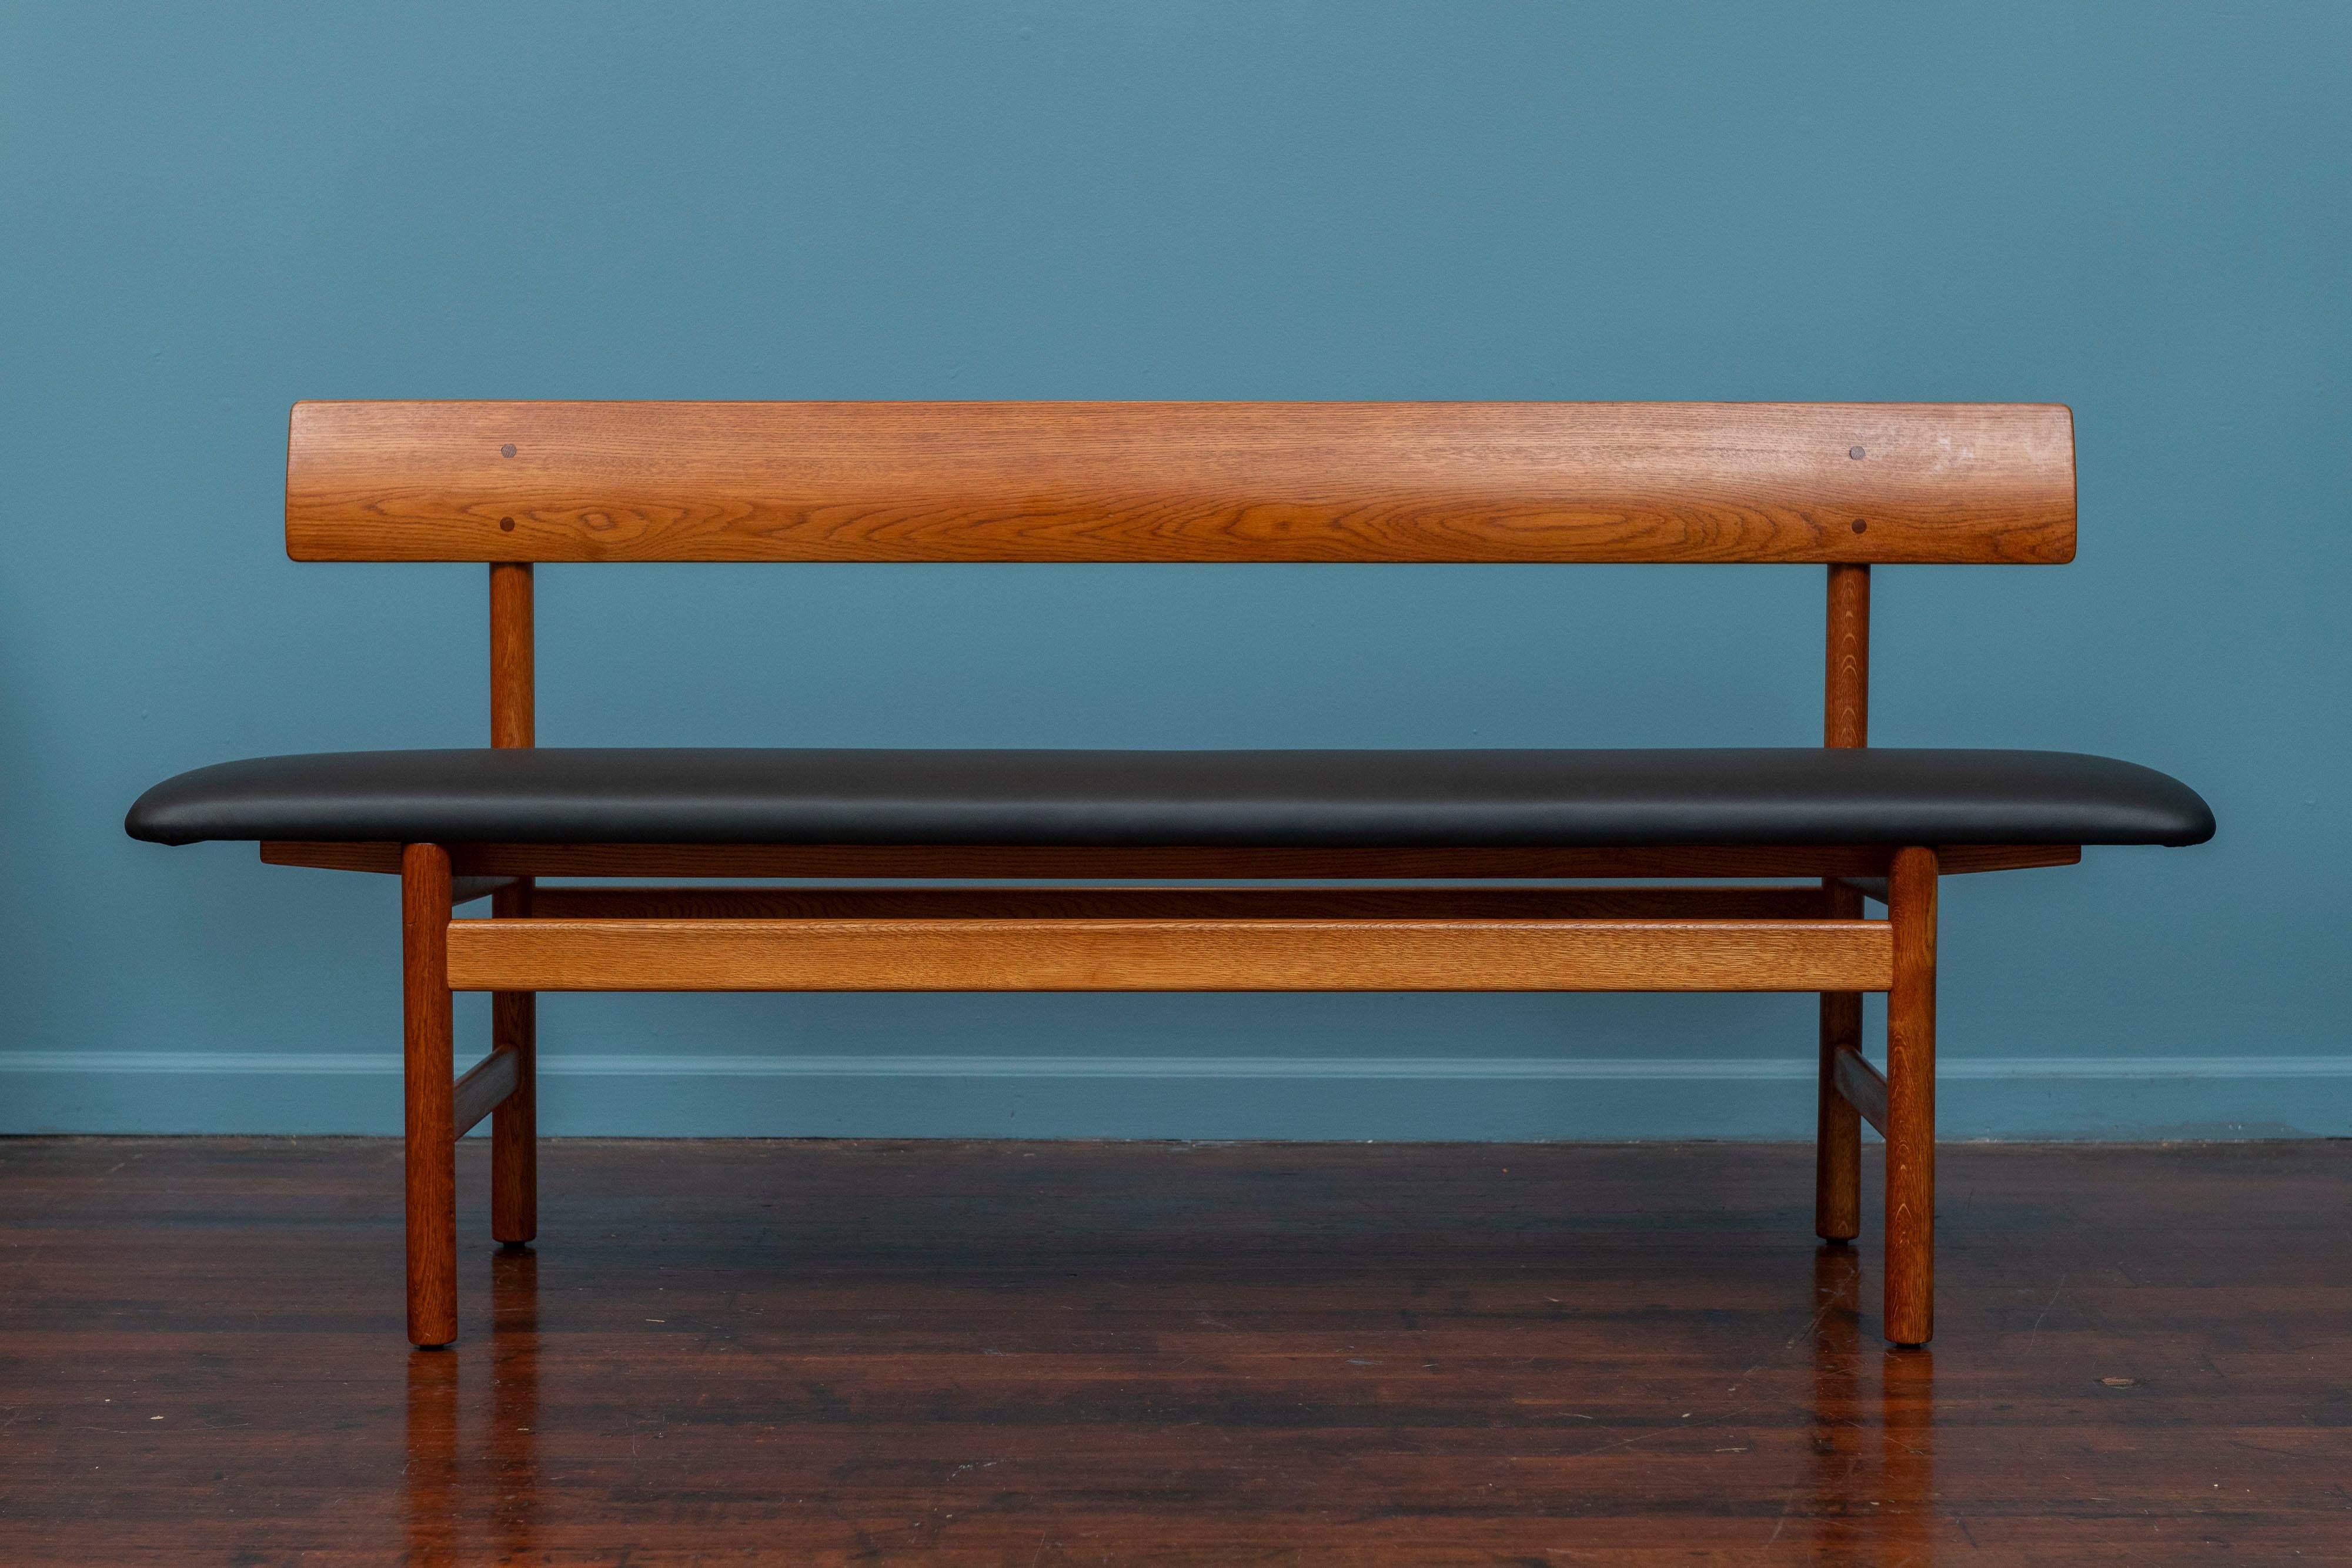 Borge Mogensen original bench model 3171 for Federica, Denmark. Made from solid turned oak with black leather, perfect for a dining table or extra seating at 18